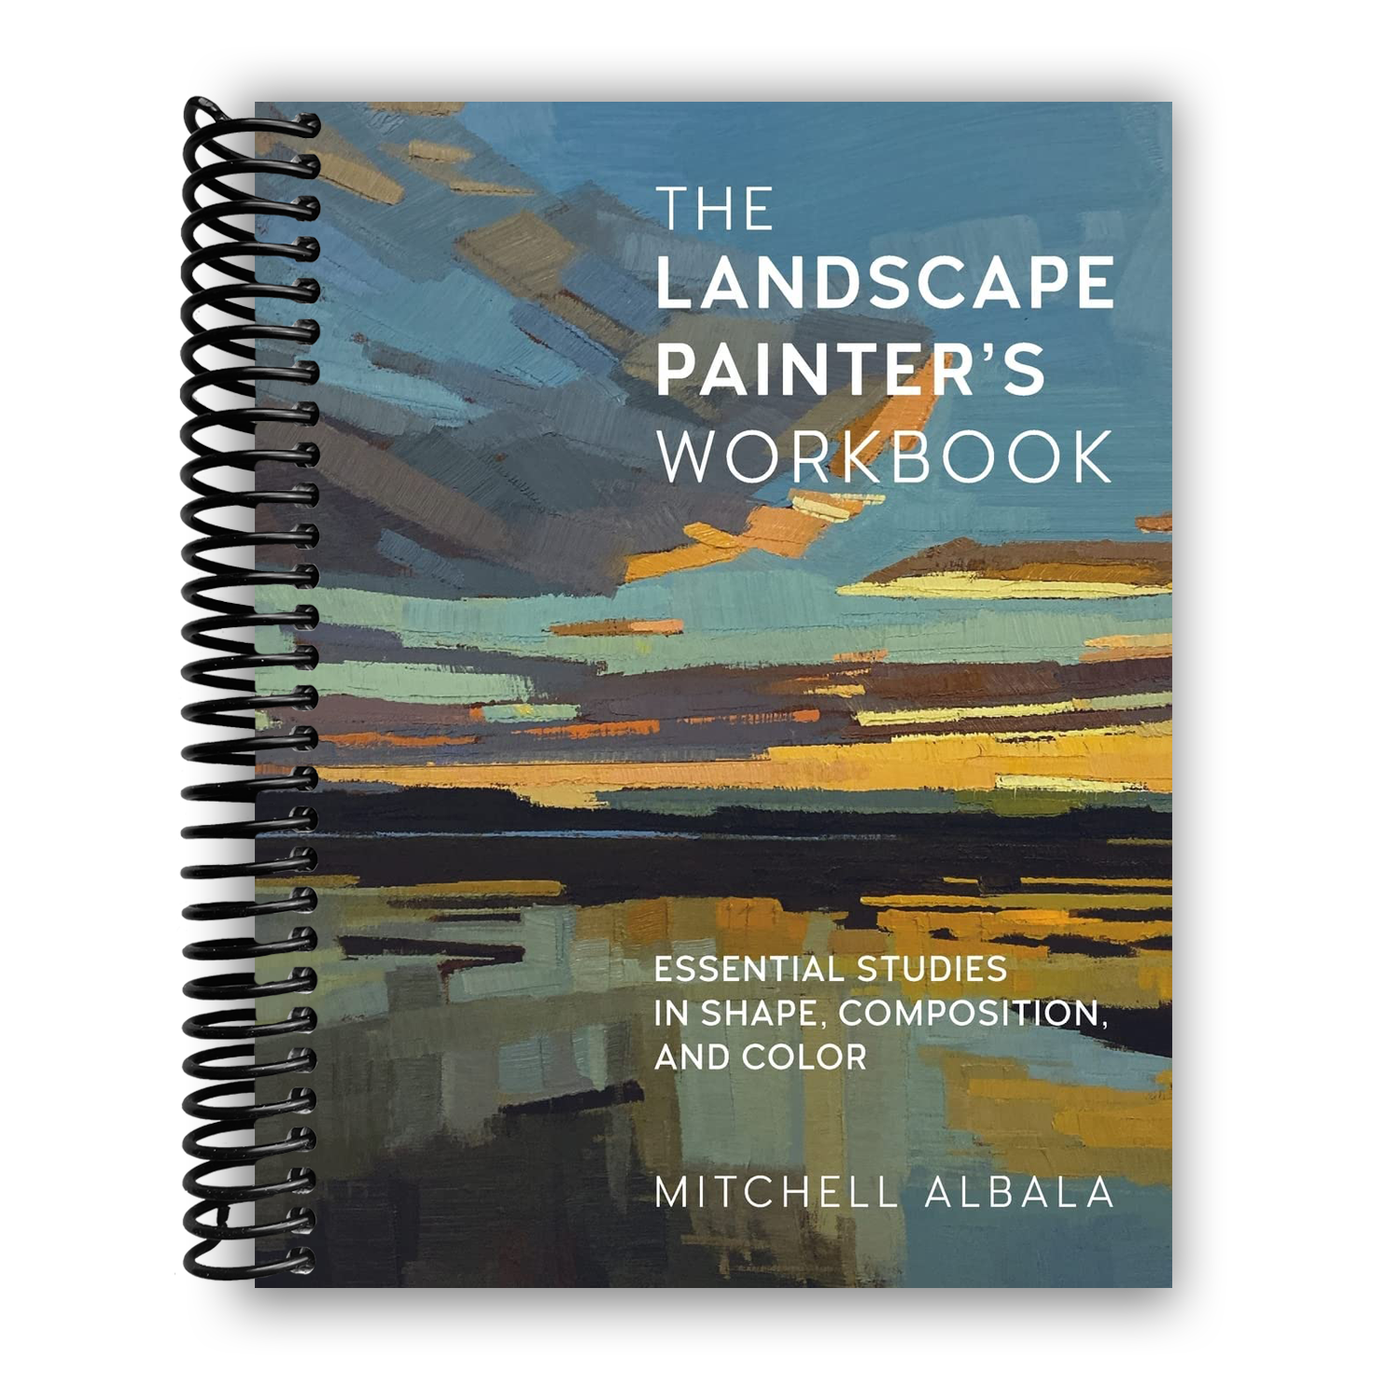 The Landscape Painter's Workbook: Essential Studies in Shape, Composition, and Color (Volume 6) (Spiral Bound)